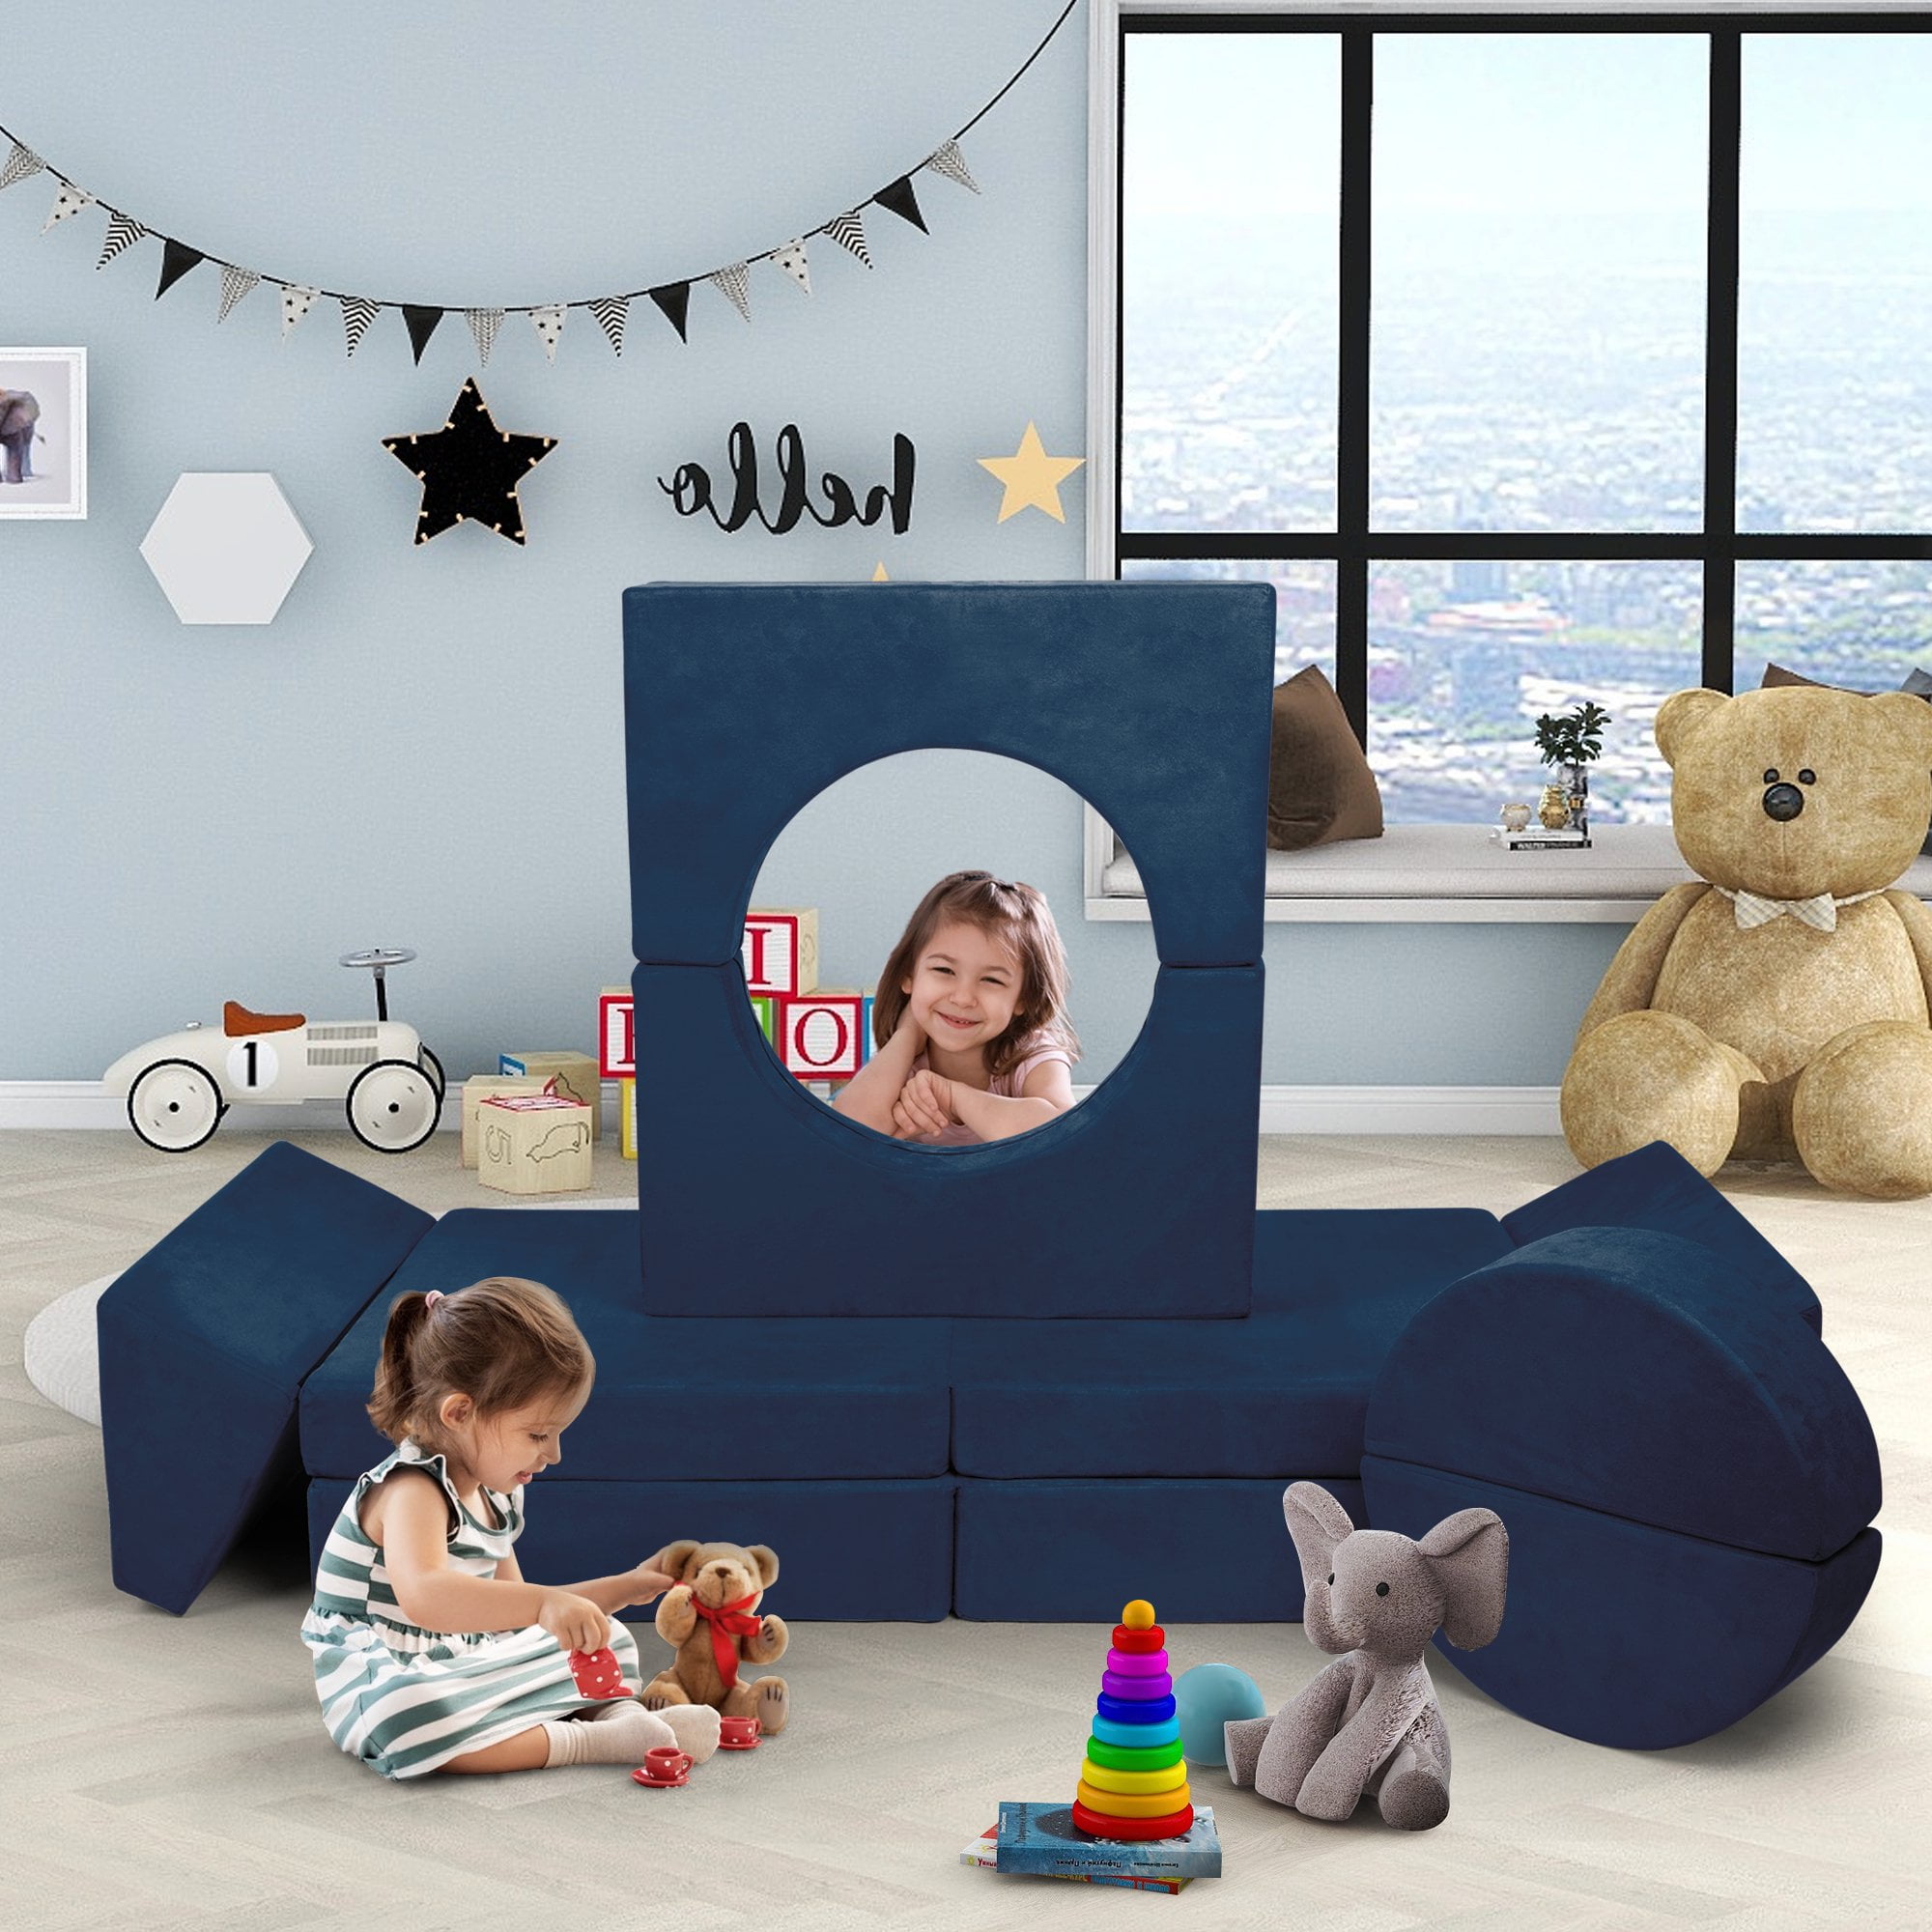 Tolead 8 Pcs Modular Kids Blue Couch Sectional Play Child Furniture, Convertible Sofa, Imaginative